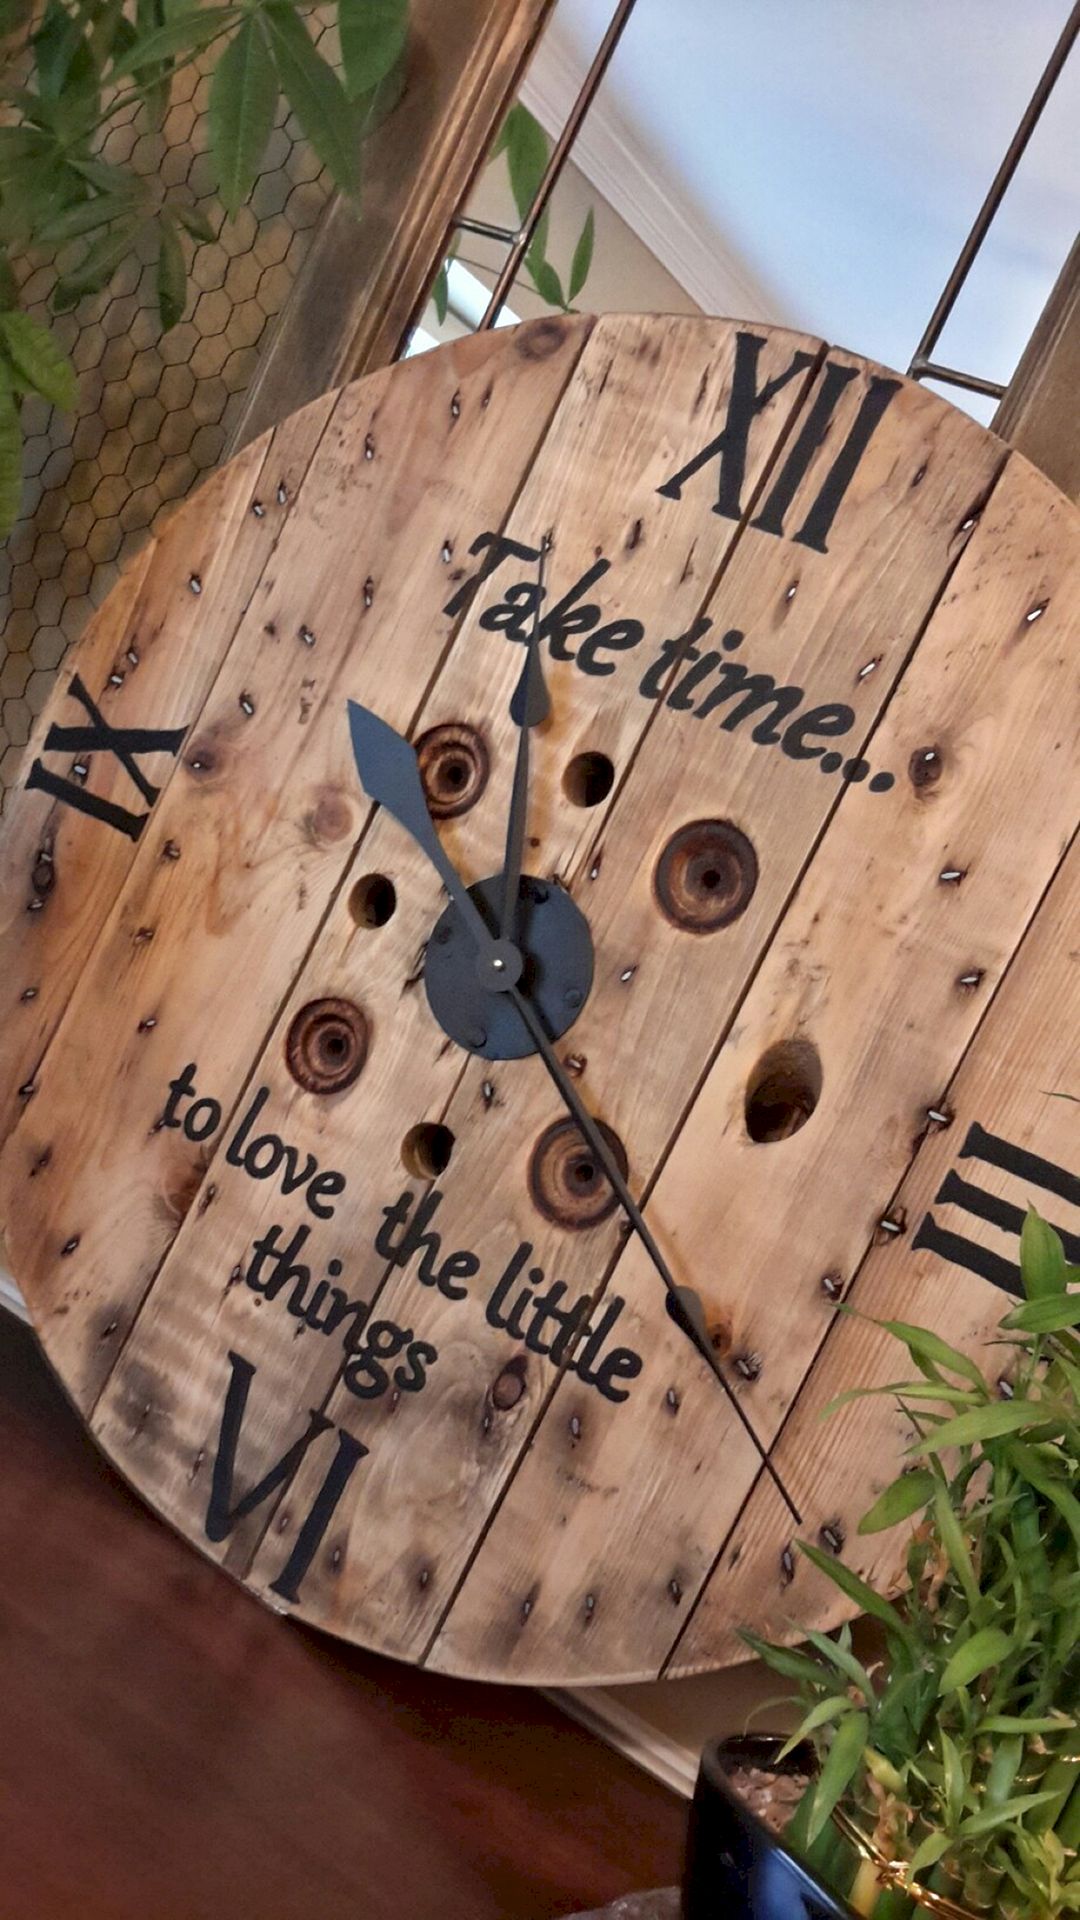 Marvelous Diy Recycled Wooden Spool For Large Clock